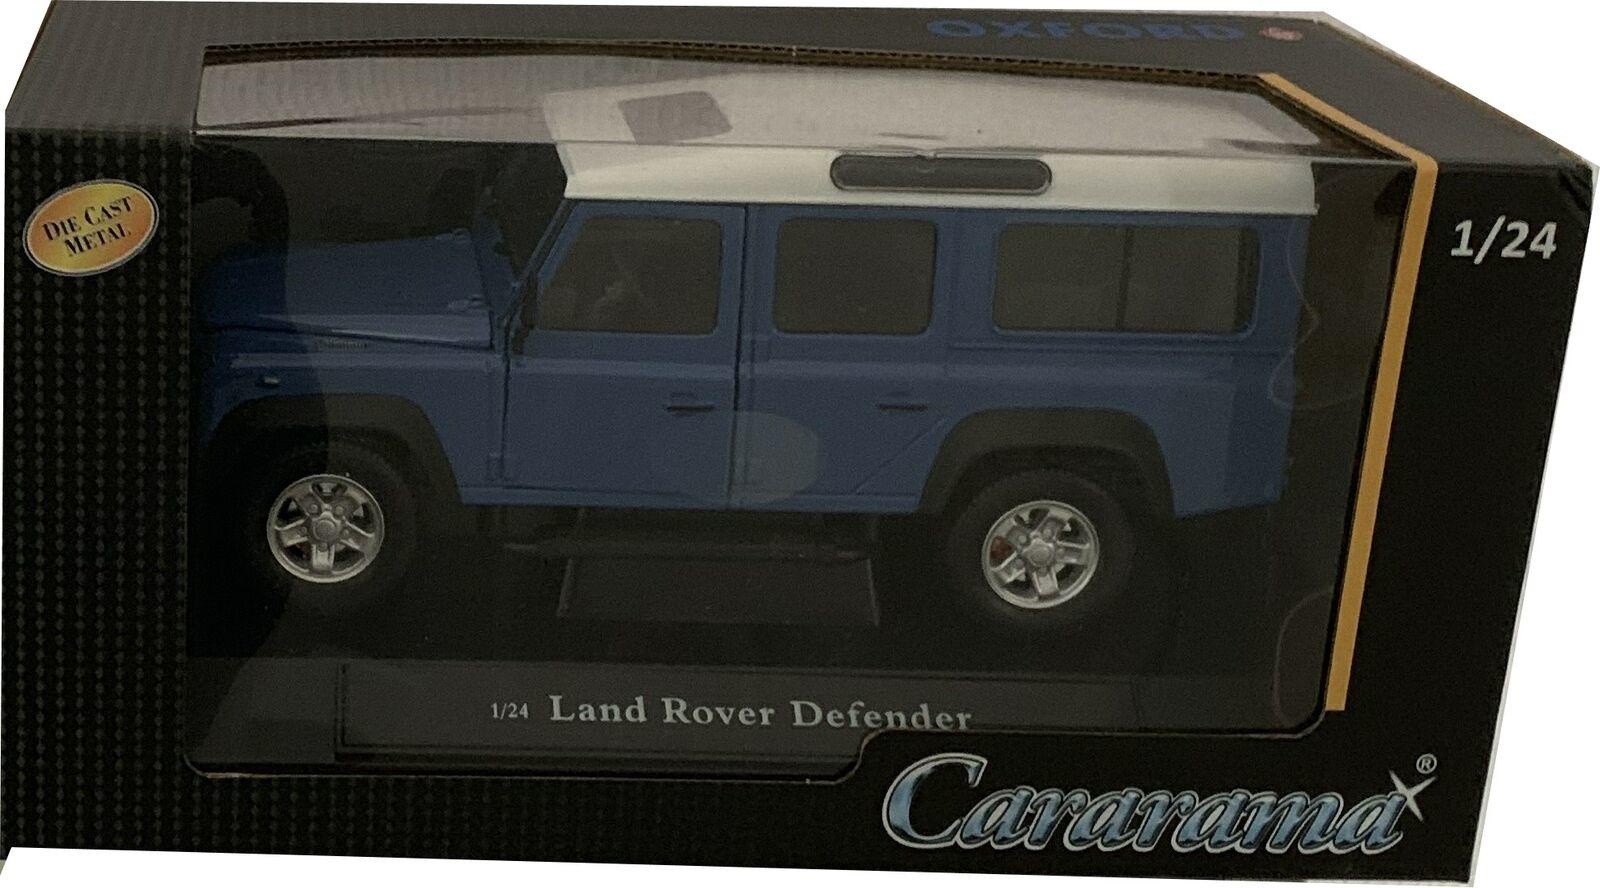 Land Rover Defender 110 in grey blue / white 1:24 scale model from Cararama